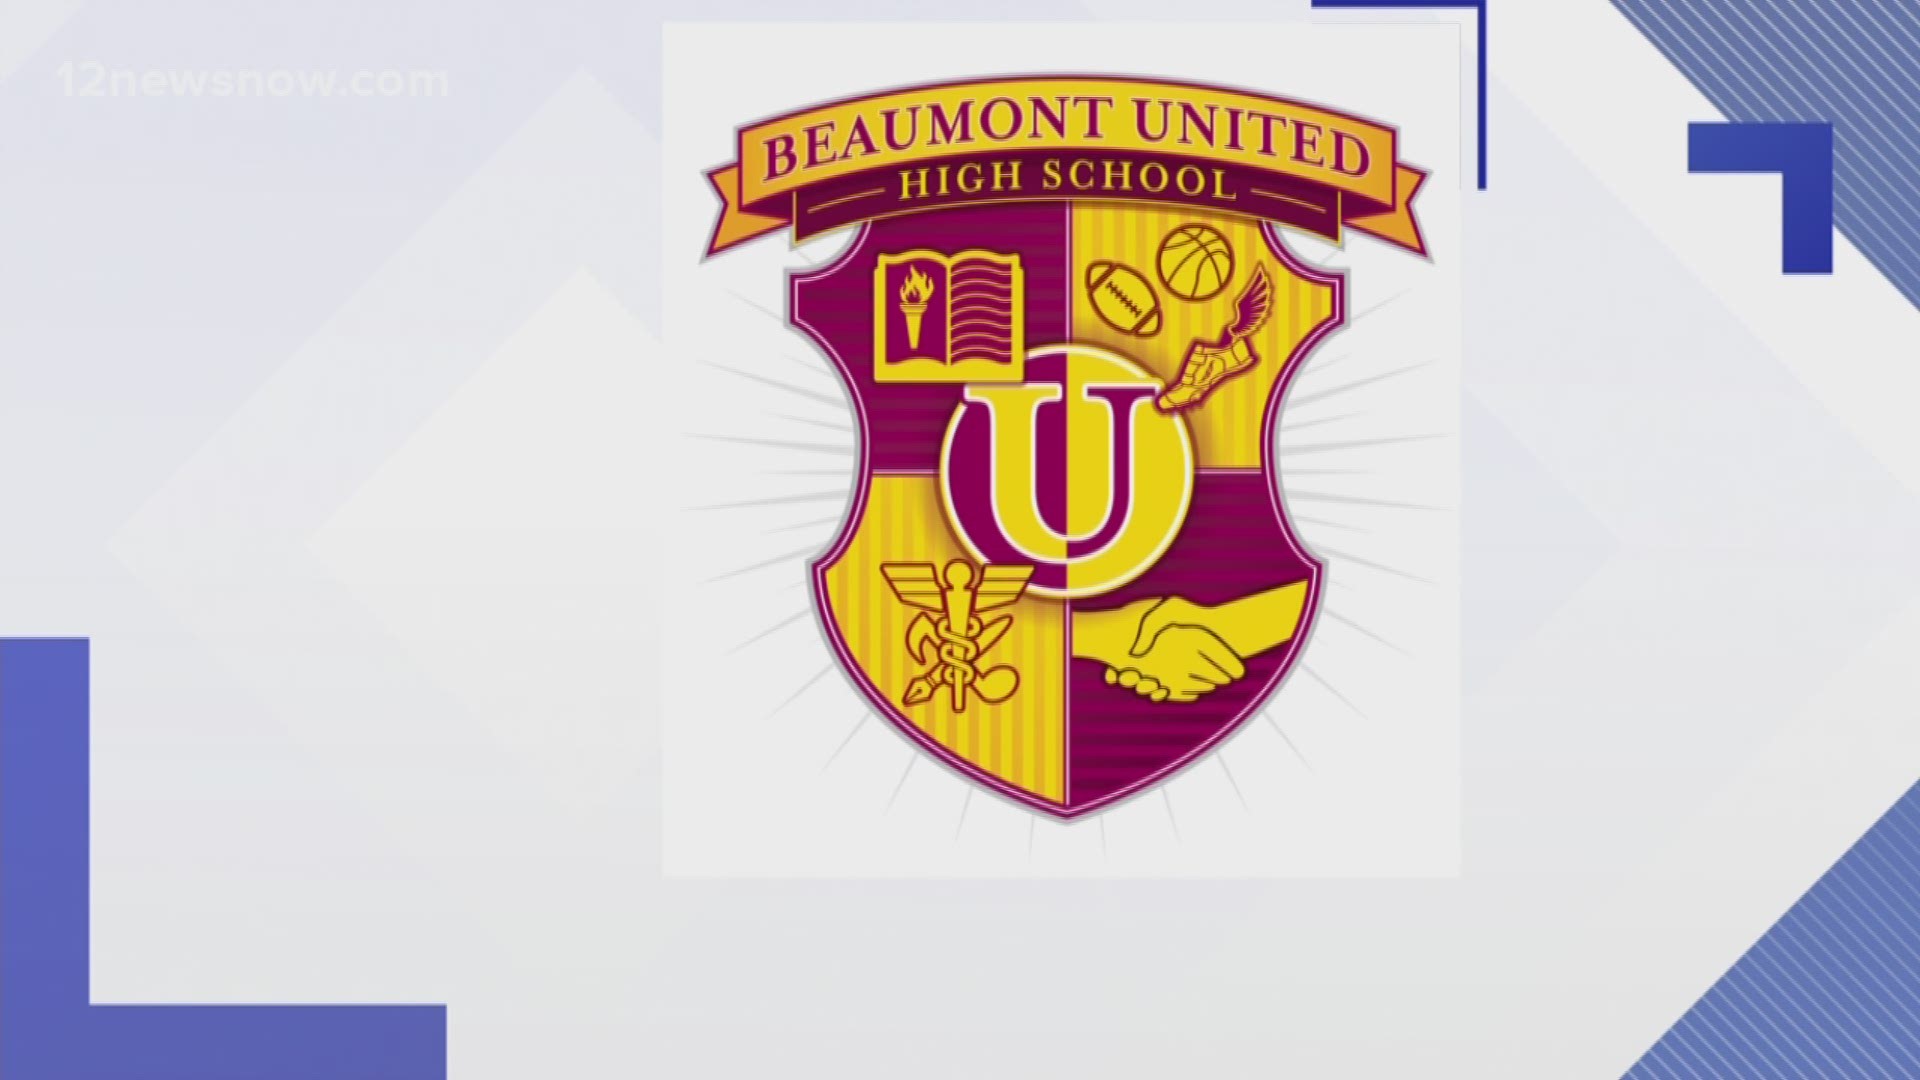 Two become one: Beaumont United high school